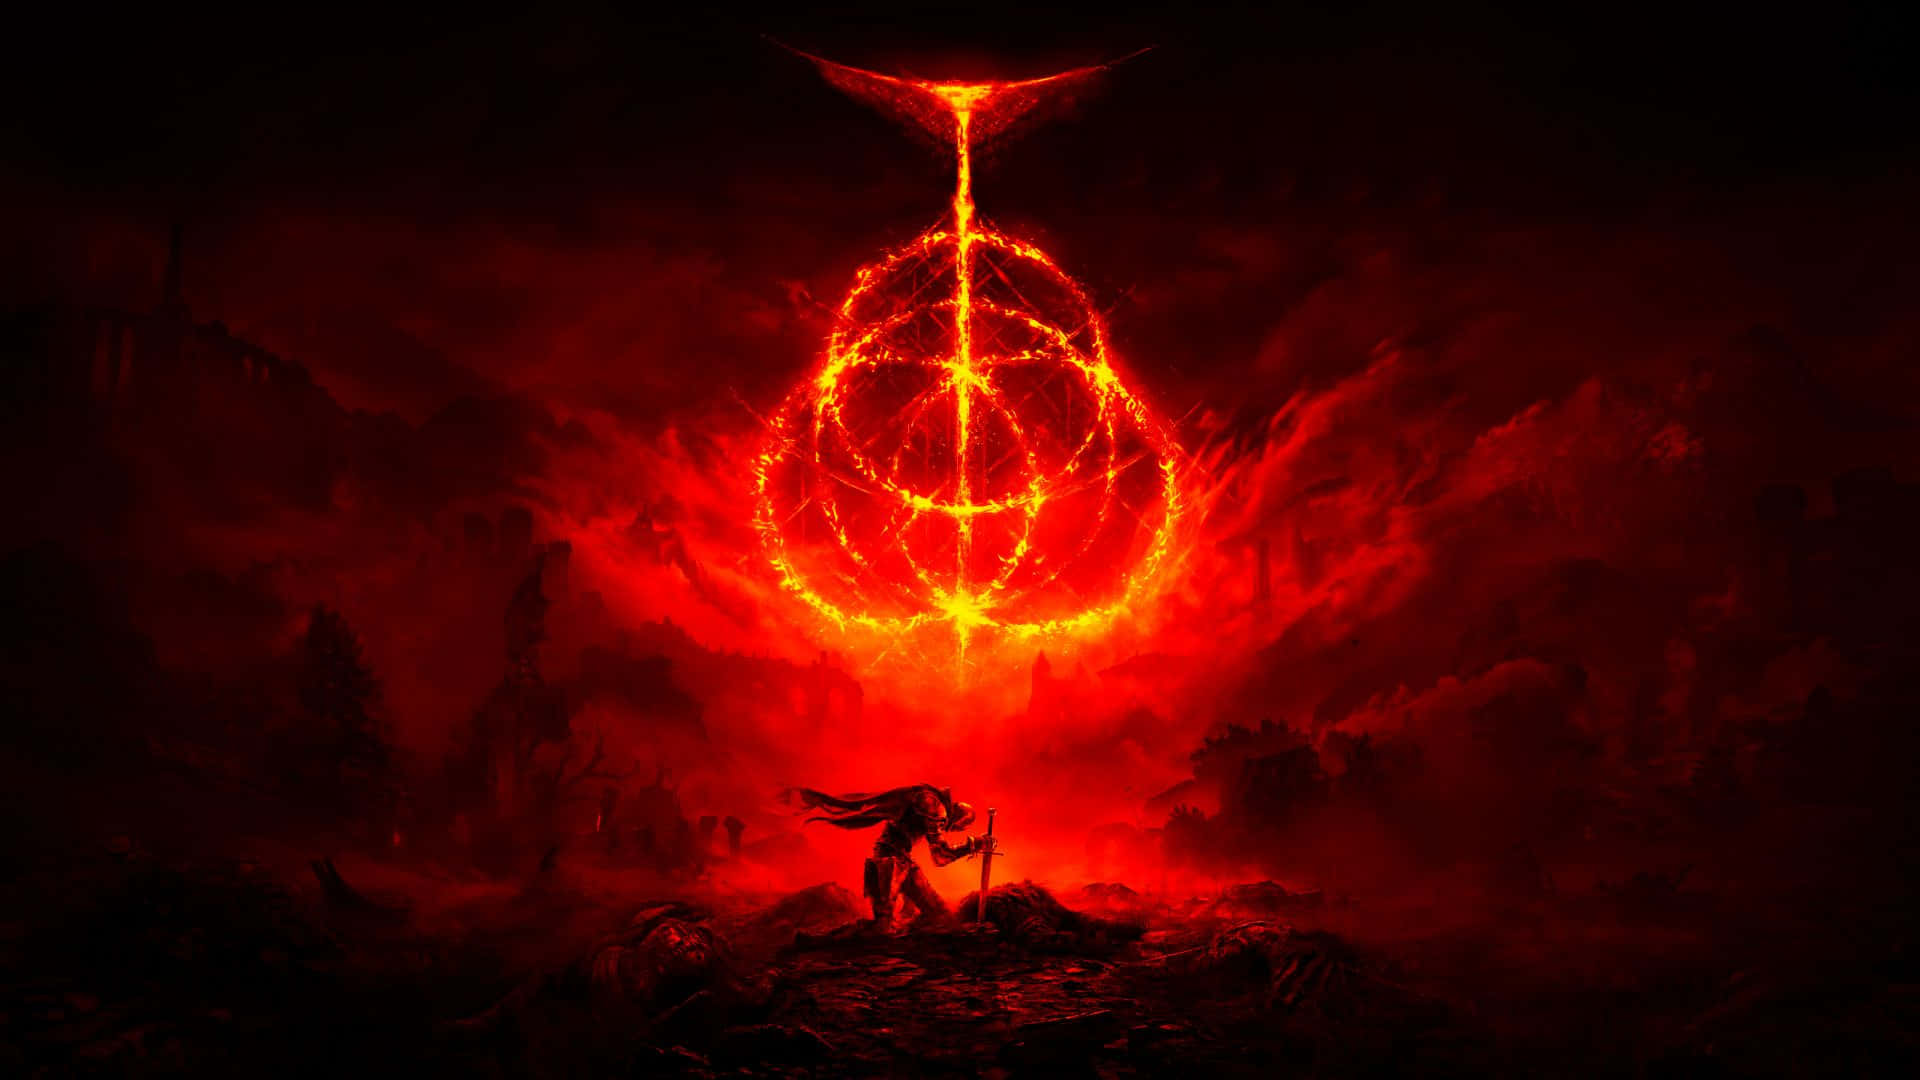 A Red And Black Image Of A Demon Standing On A Mountain